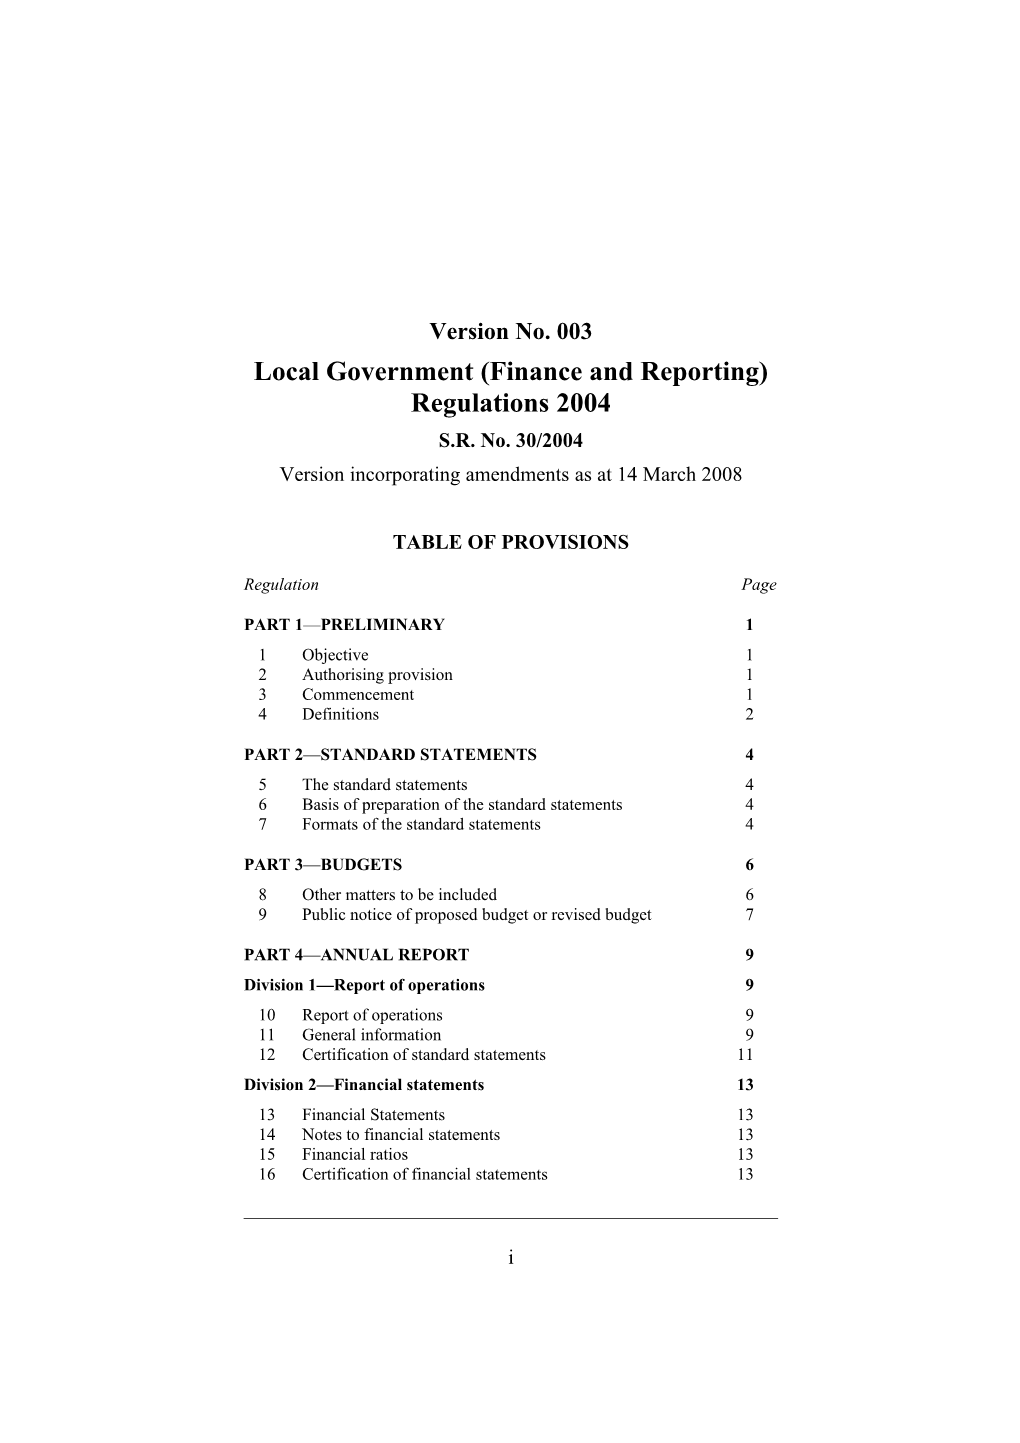 Local Government (Finance and Reporting) Regulations 2004